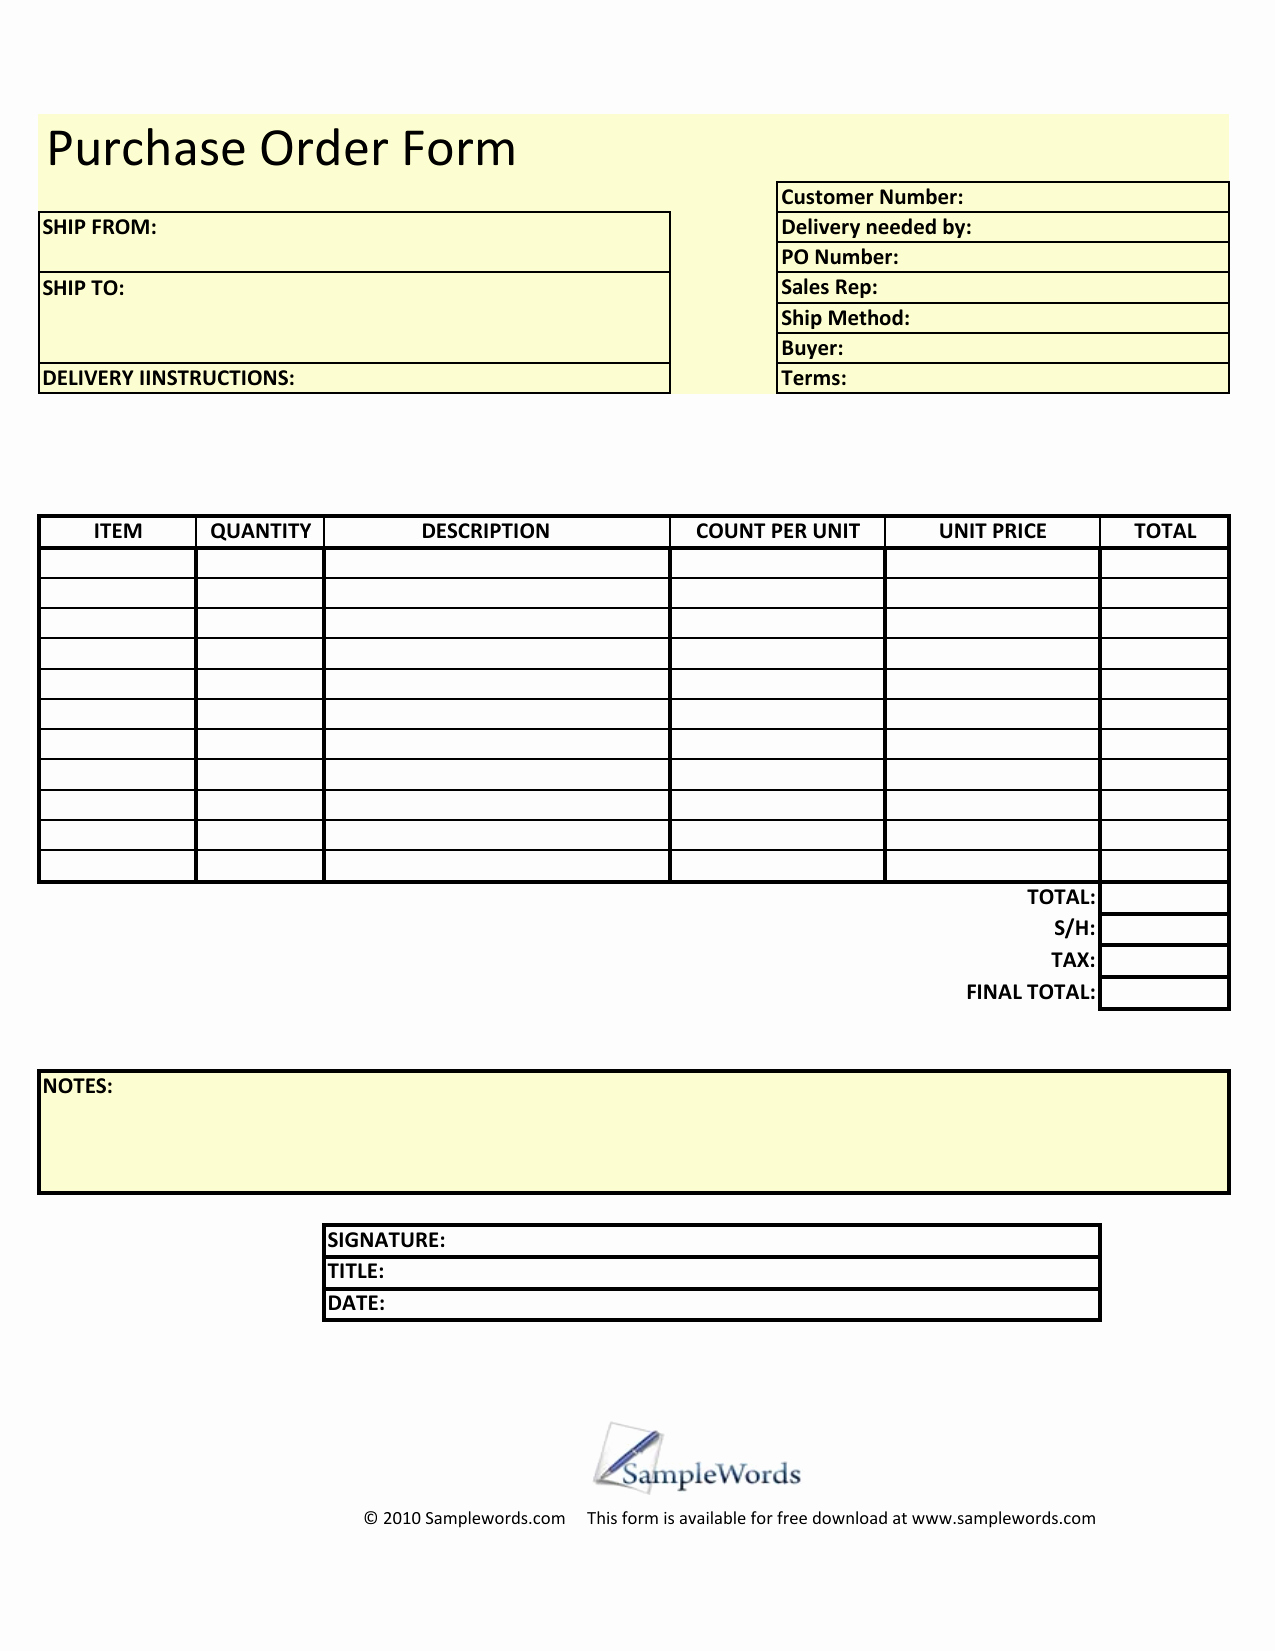 Blank order form Template Inspirational Download Blank Purchase order form Template Excel